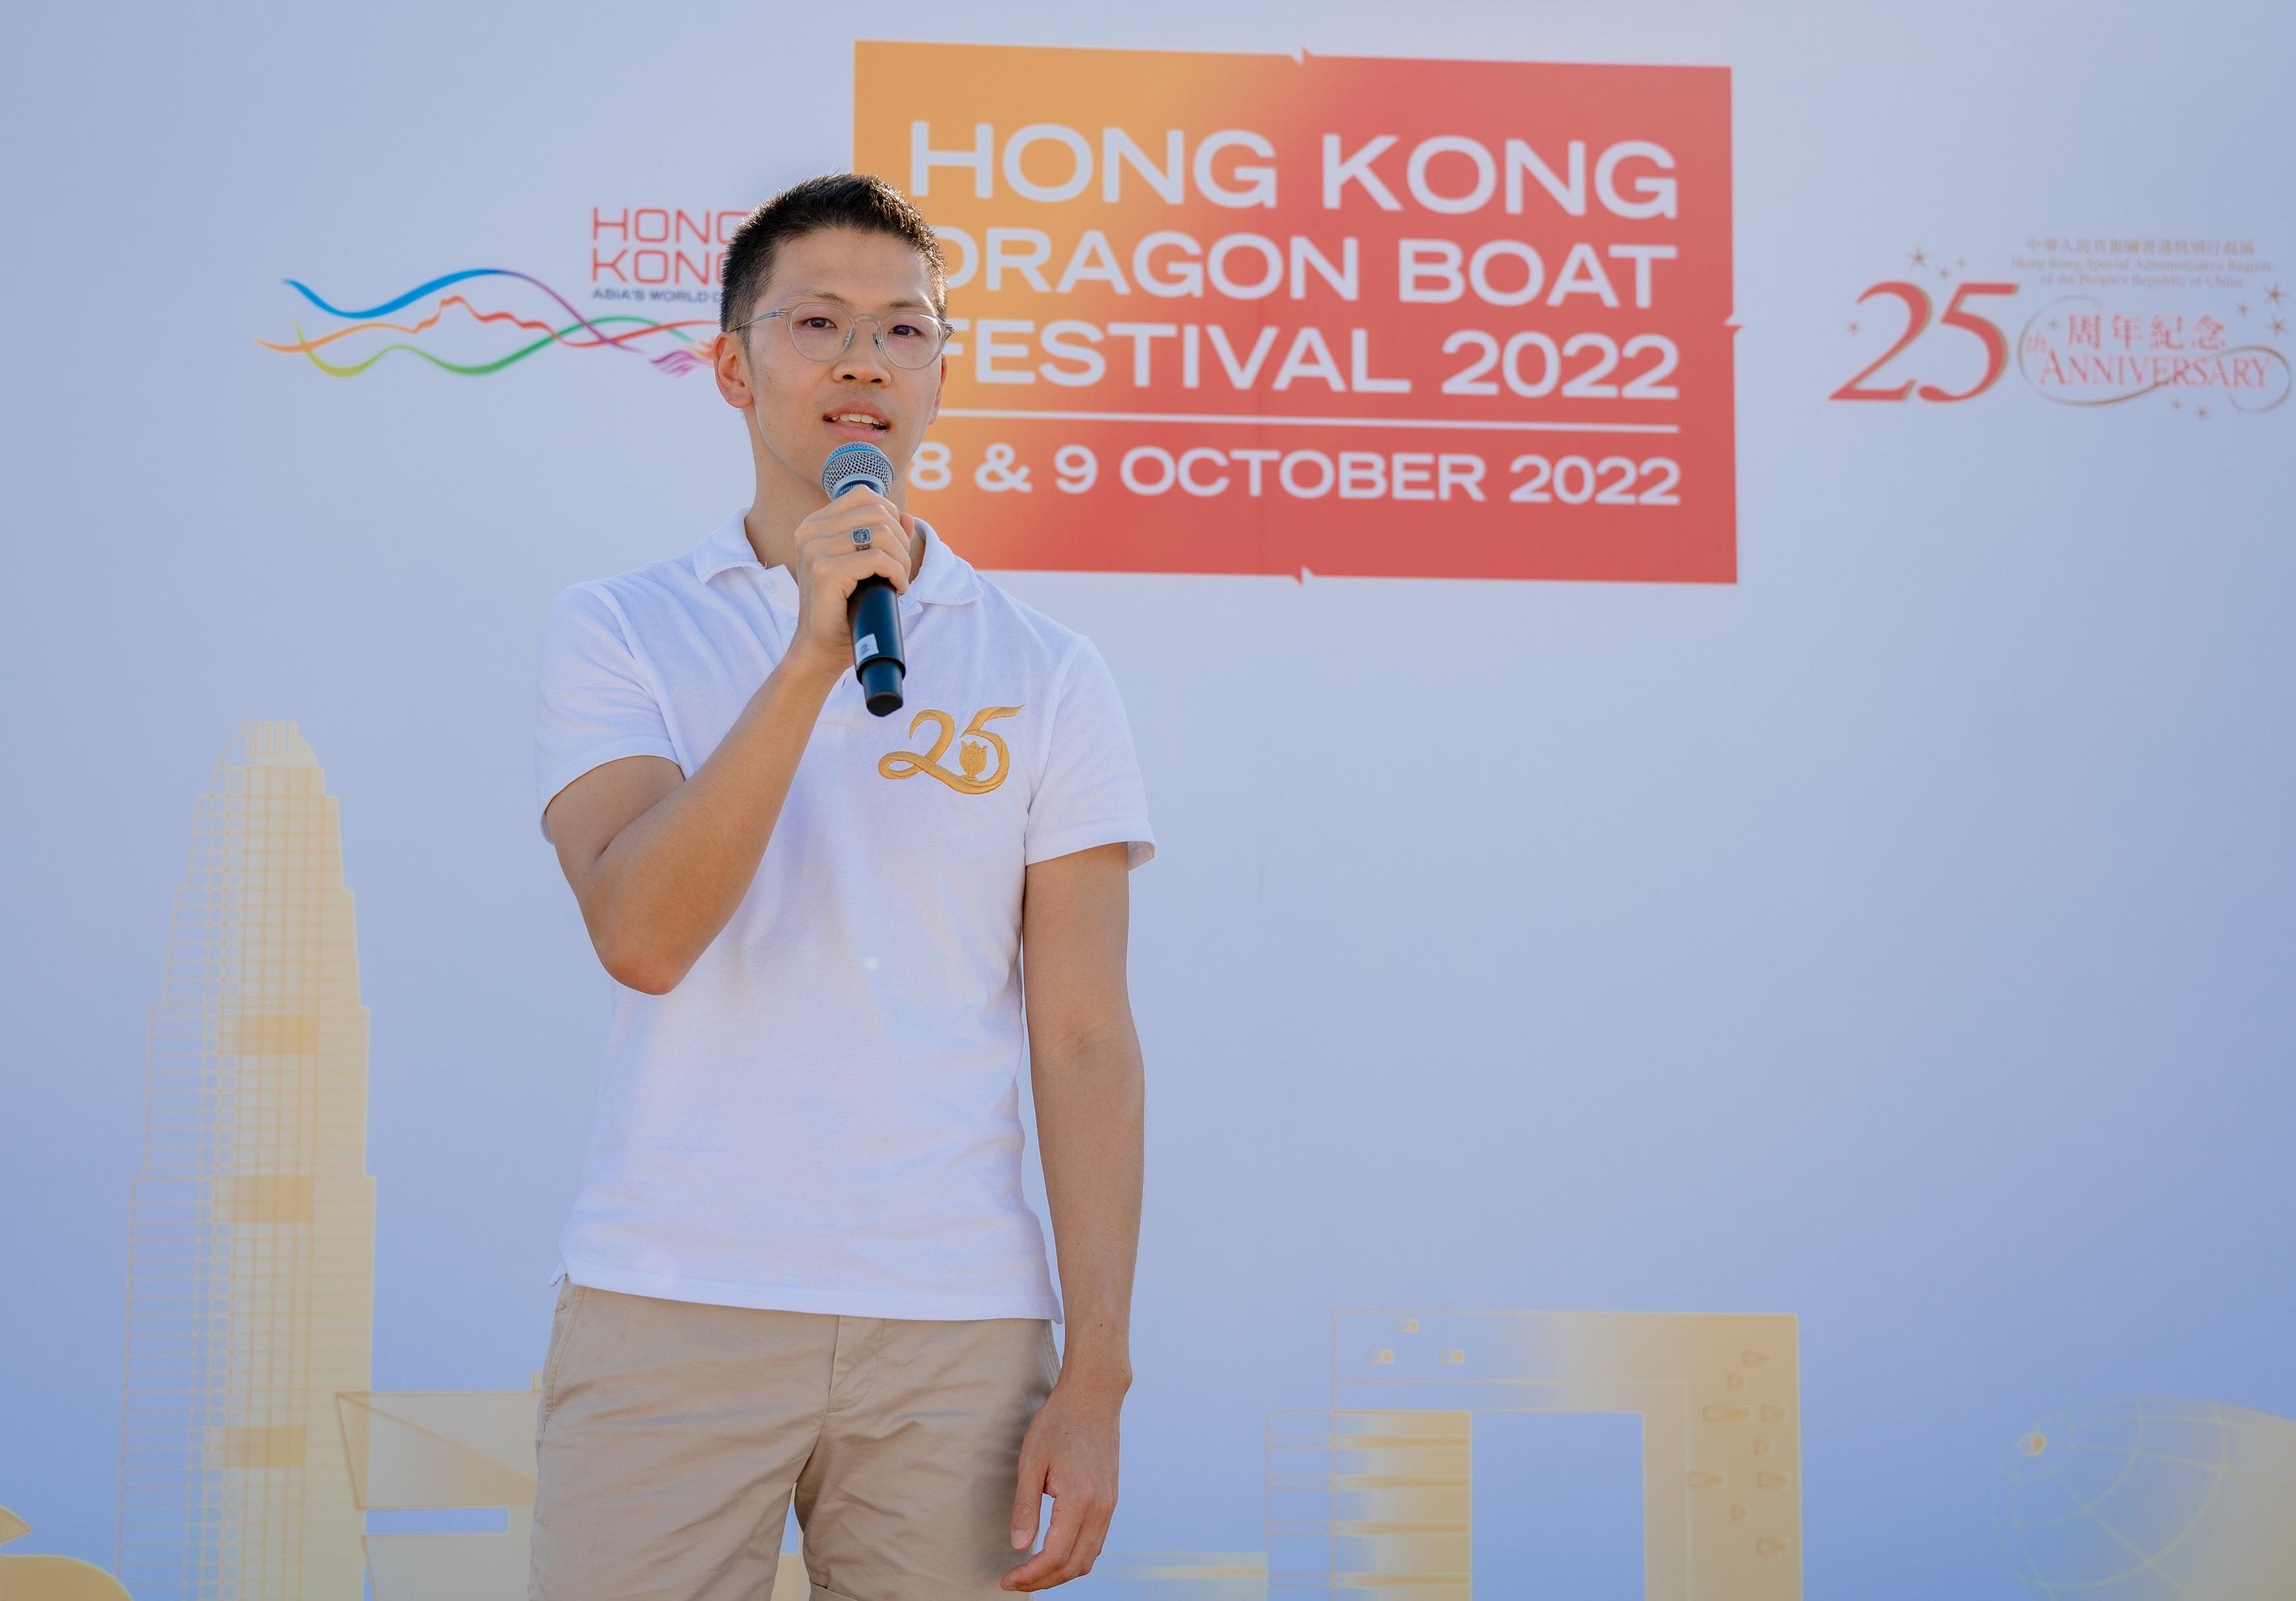 The first-ever Hong Kong Dragon Boat Festival in Dubai was held on October 8 and 9 (Dubai time) to celebrate the 25th anniversary of the establishment of the Hong Kong Special Administrative Region. Photo shows Deputy Director of the Hong Kong Economic and Trade Office in Dubai Mr Alvin Wong speaking before the award presentation ceremony. 